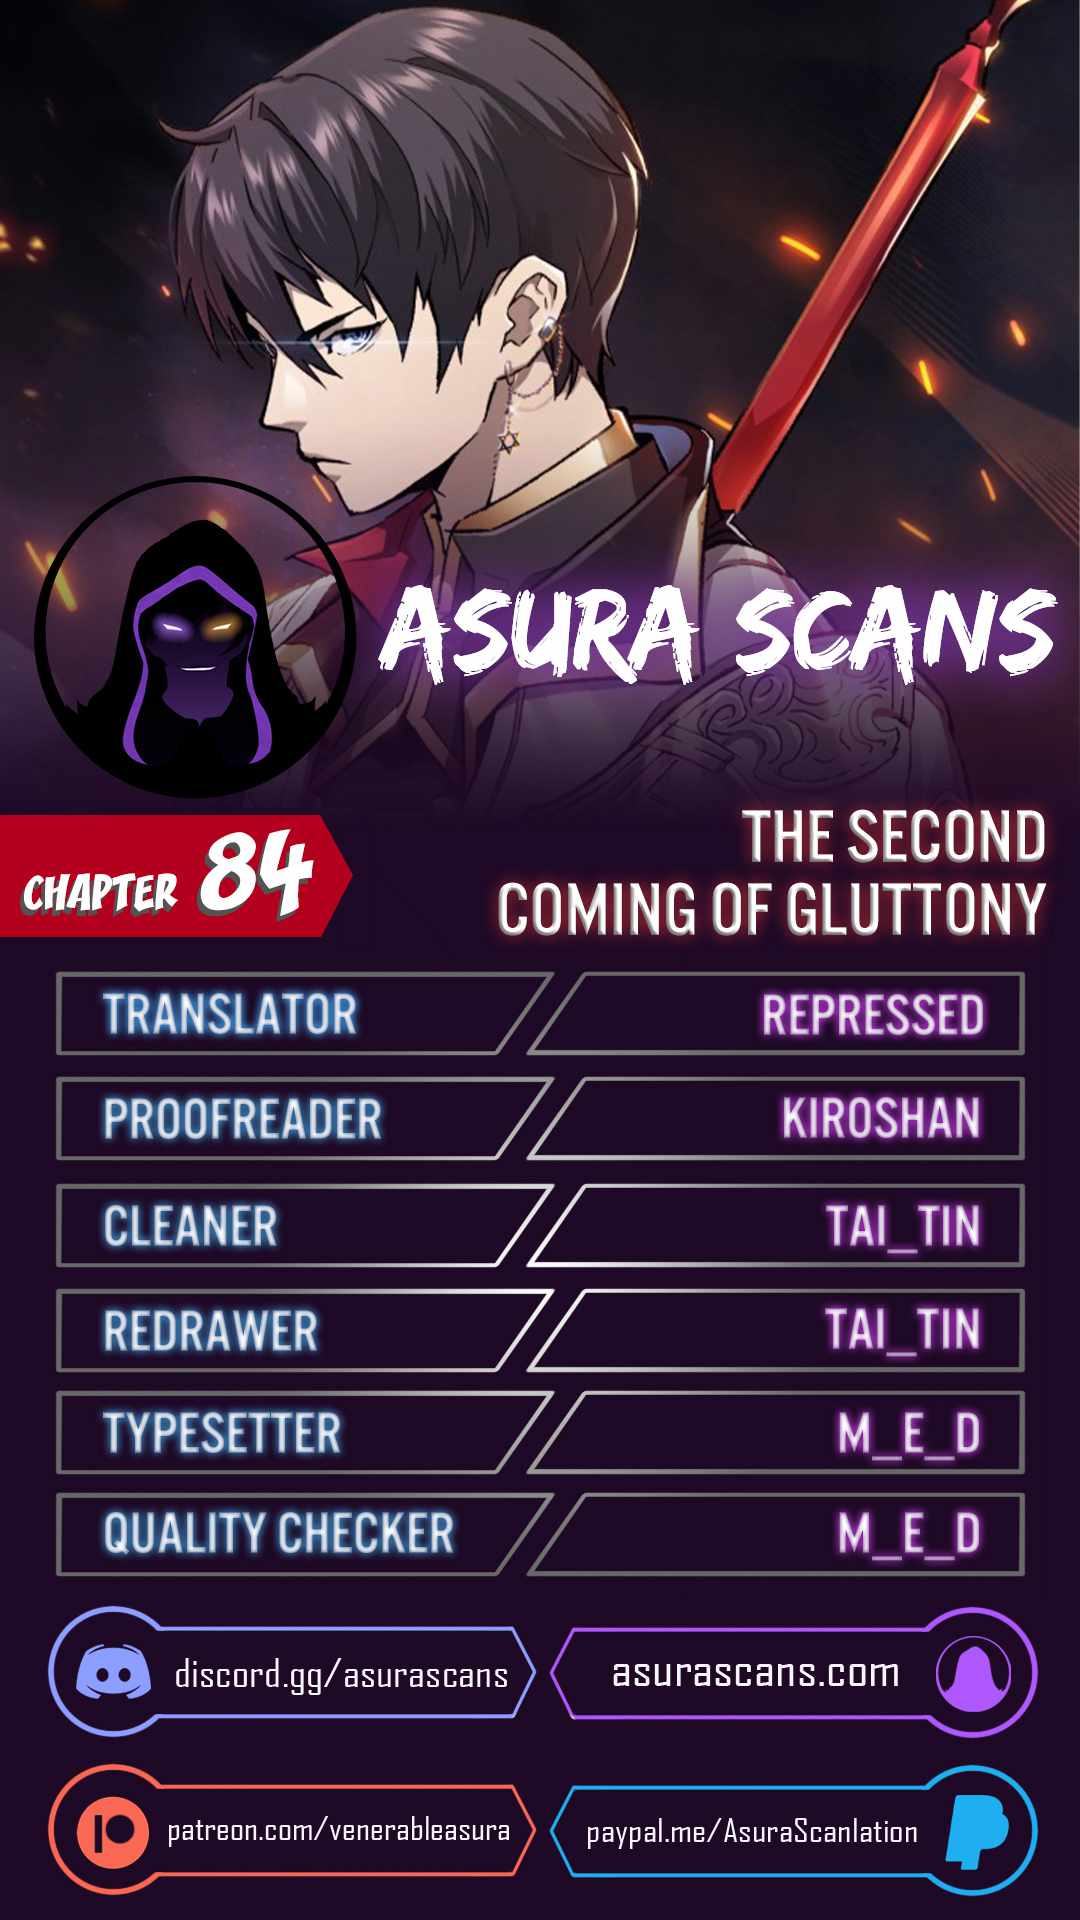 The Second Coming of Gluttony Chapter 84, The Second Coming of Gluttony 84, Read The Second Coming of Gluttony Chapter 84, The Second Coming of Gluttony Chapter 84 Manga, The Second Coming of Gluttony Chapter 84 english, The Second Coming of Gluttony Chapter 84 raw manga, The Second Coming of Gluttony Chapter 84 online, The Second Coming of Gluttony Chapter 84 high quality, The Second Coming of Gluttony 84 chapter, The Second Coming of Gluttony Chapter 84 manga scan